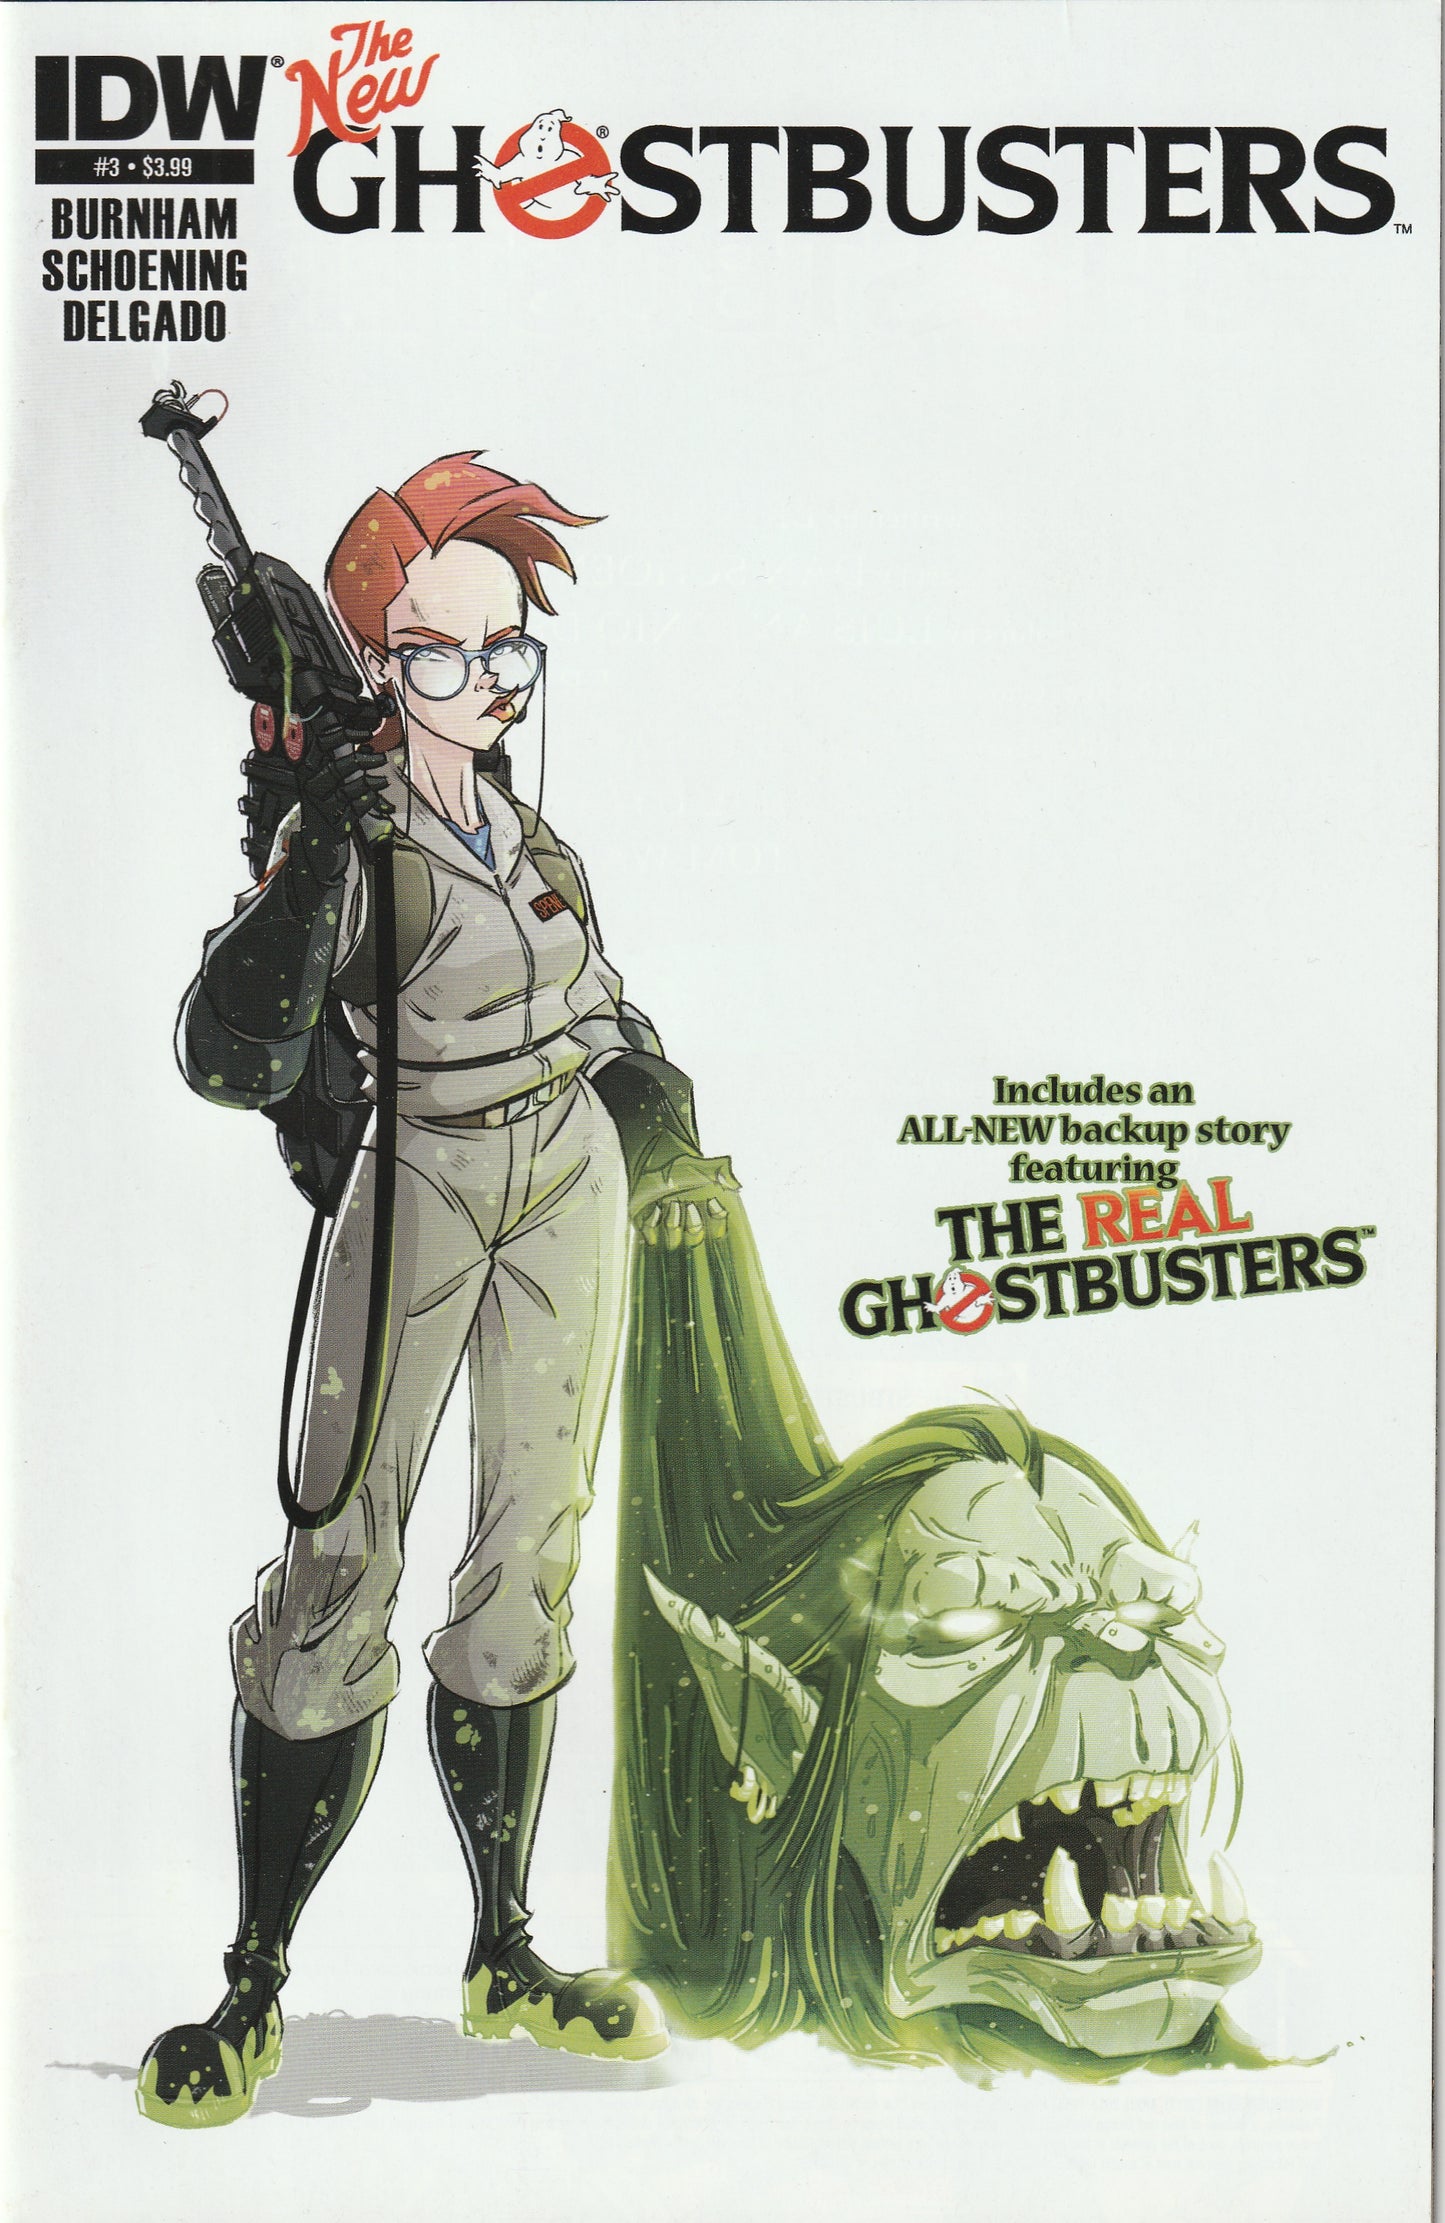 Ghostbusters #3 (2013) - Cover A Dan Schoening Cover